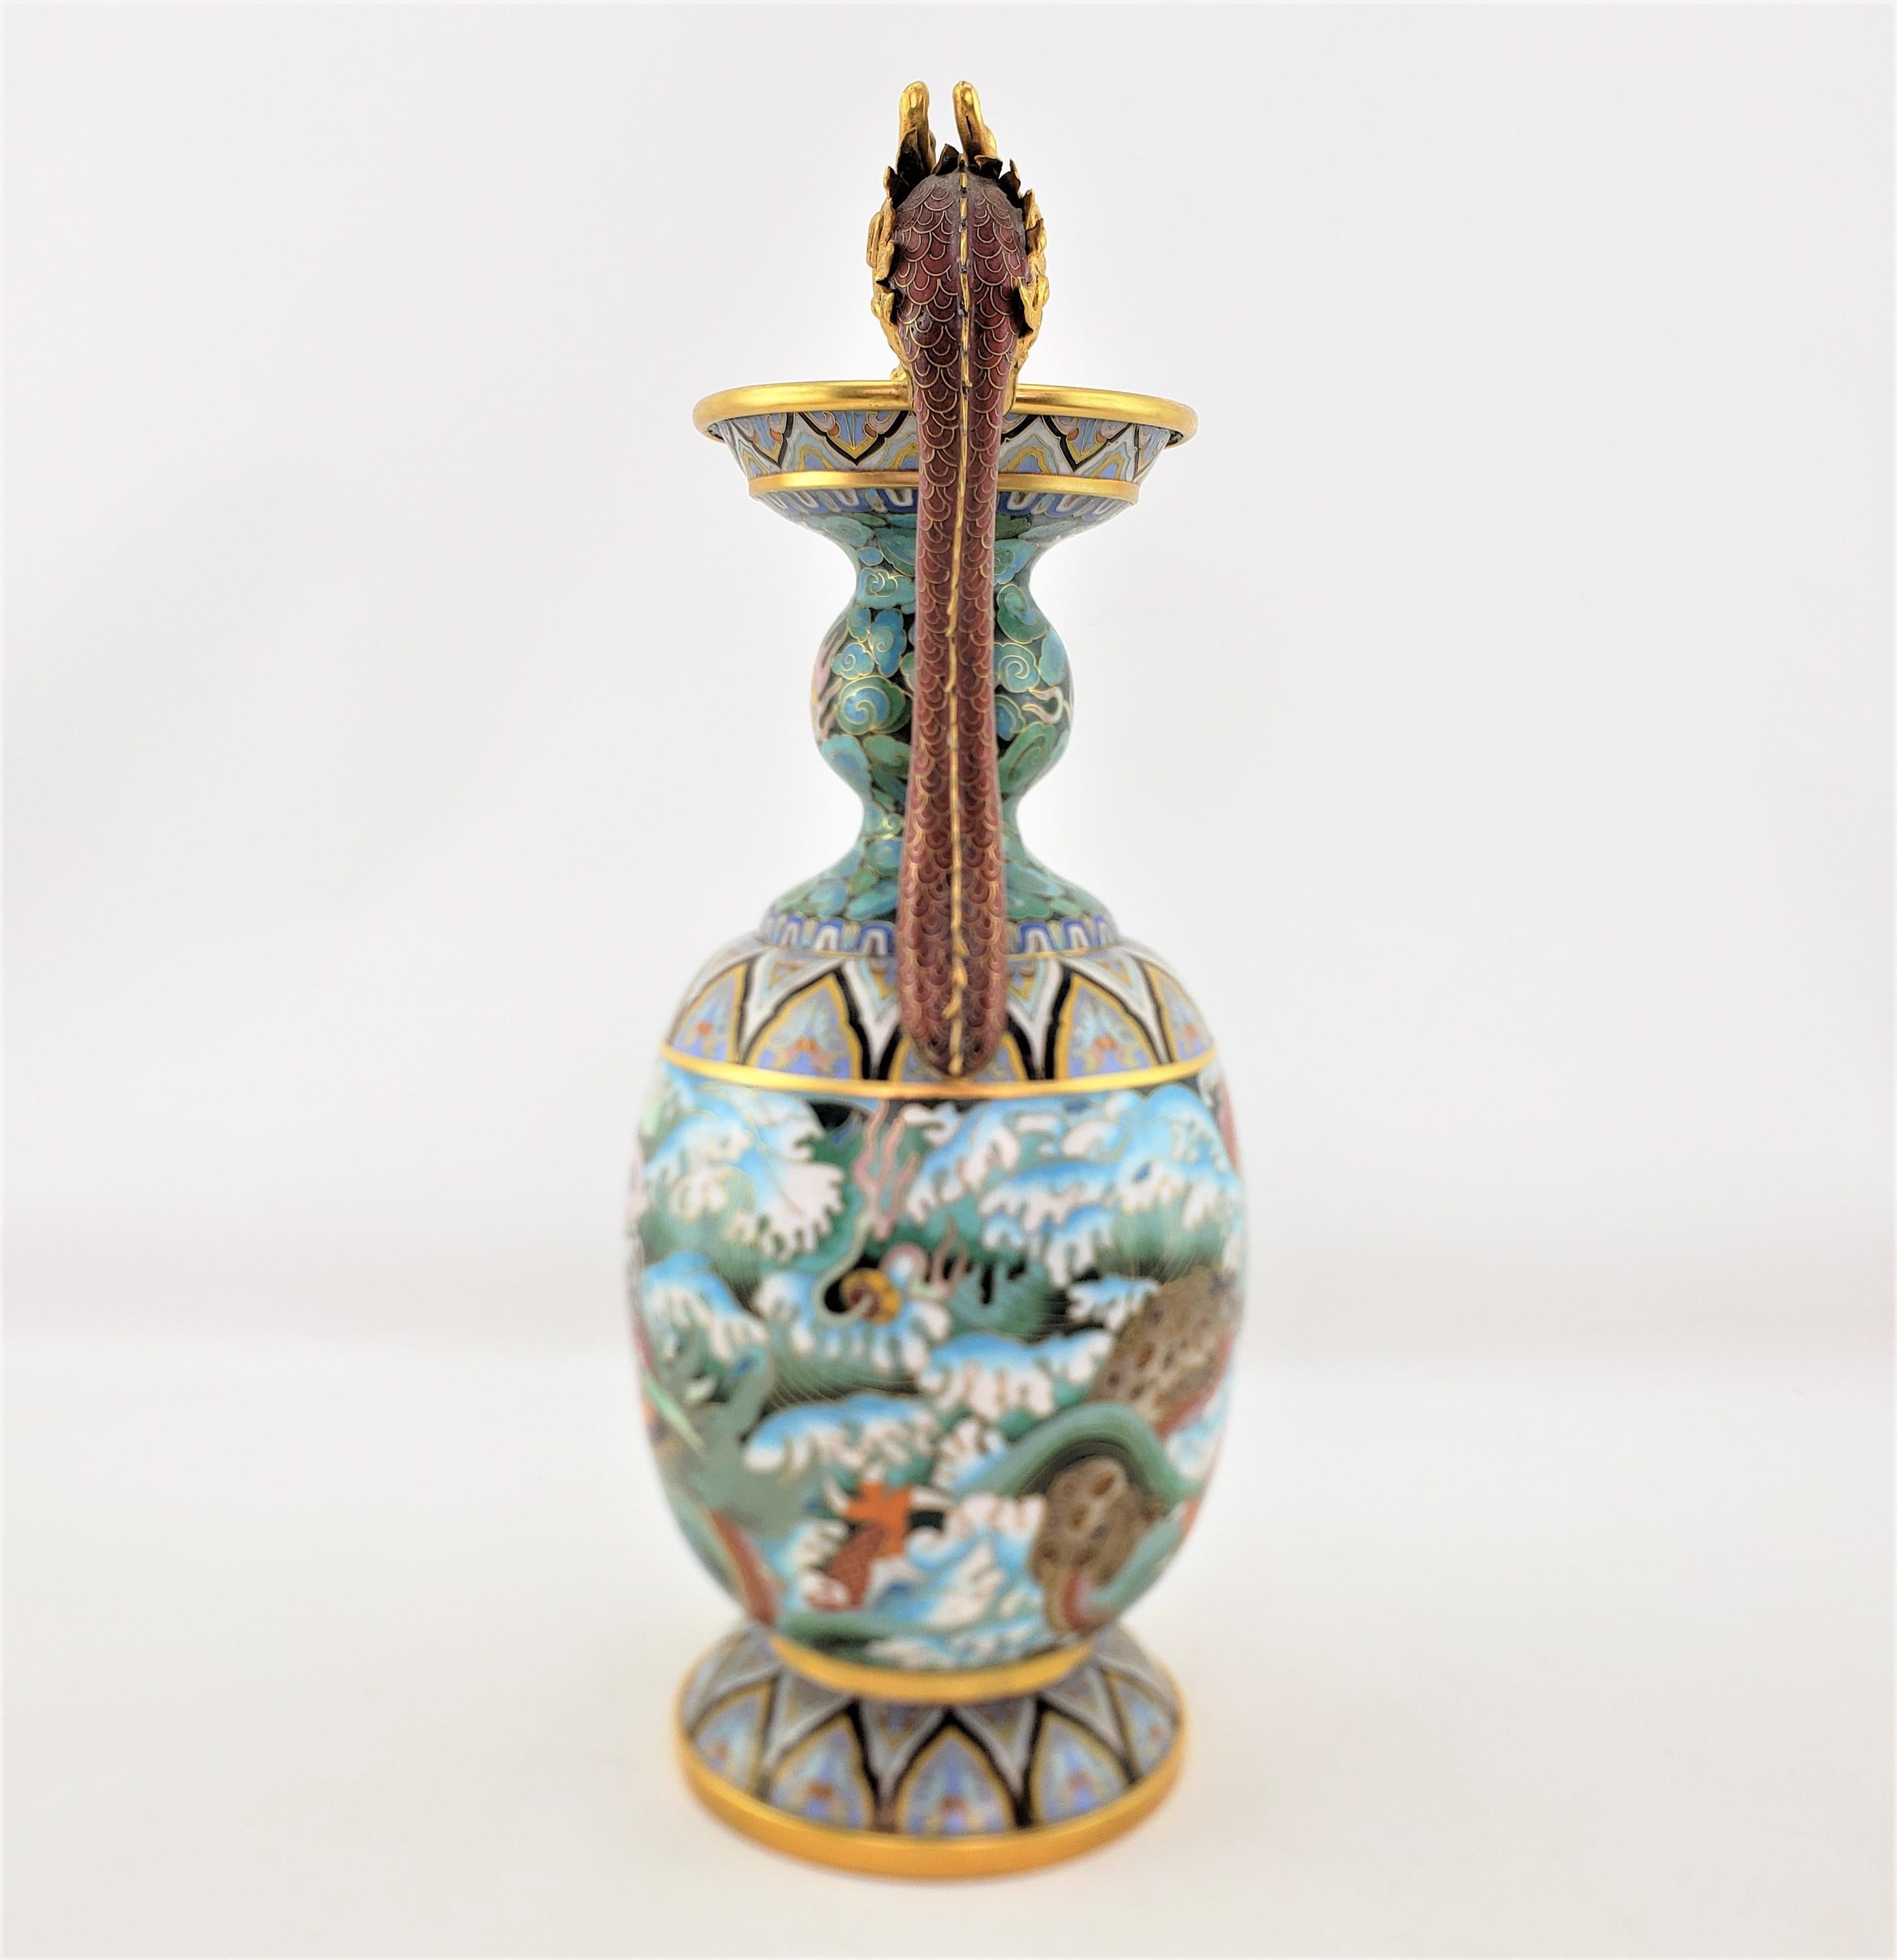 Large Vintage Decorative Chinese Cloissone Vase with Imperial Dragon Handles In Good Condition For Sale In Hamilton, Ontario